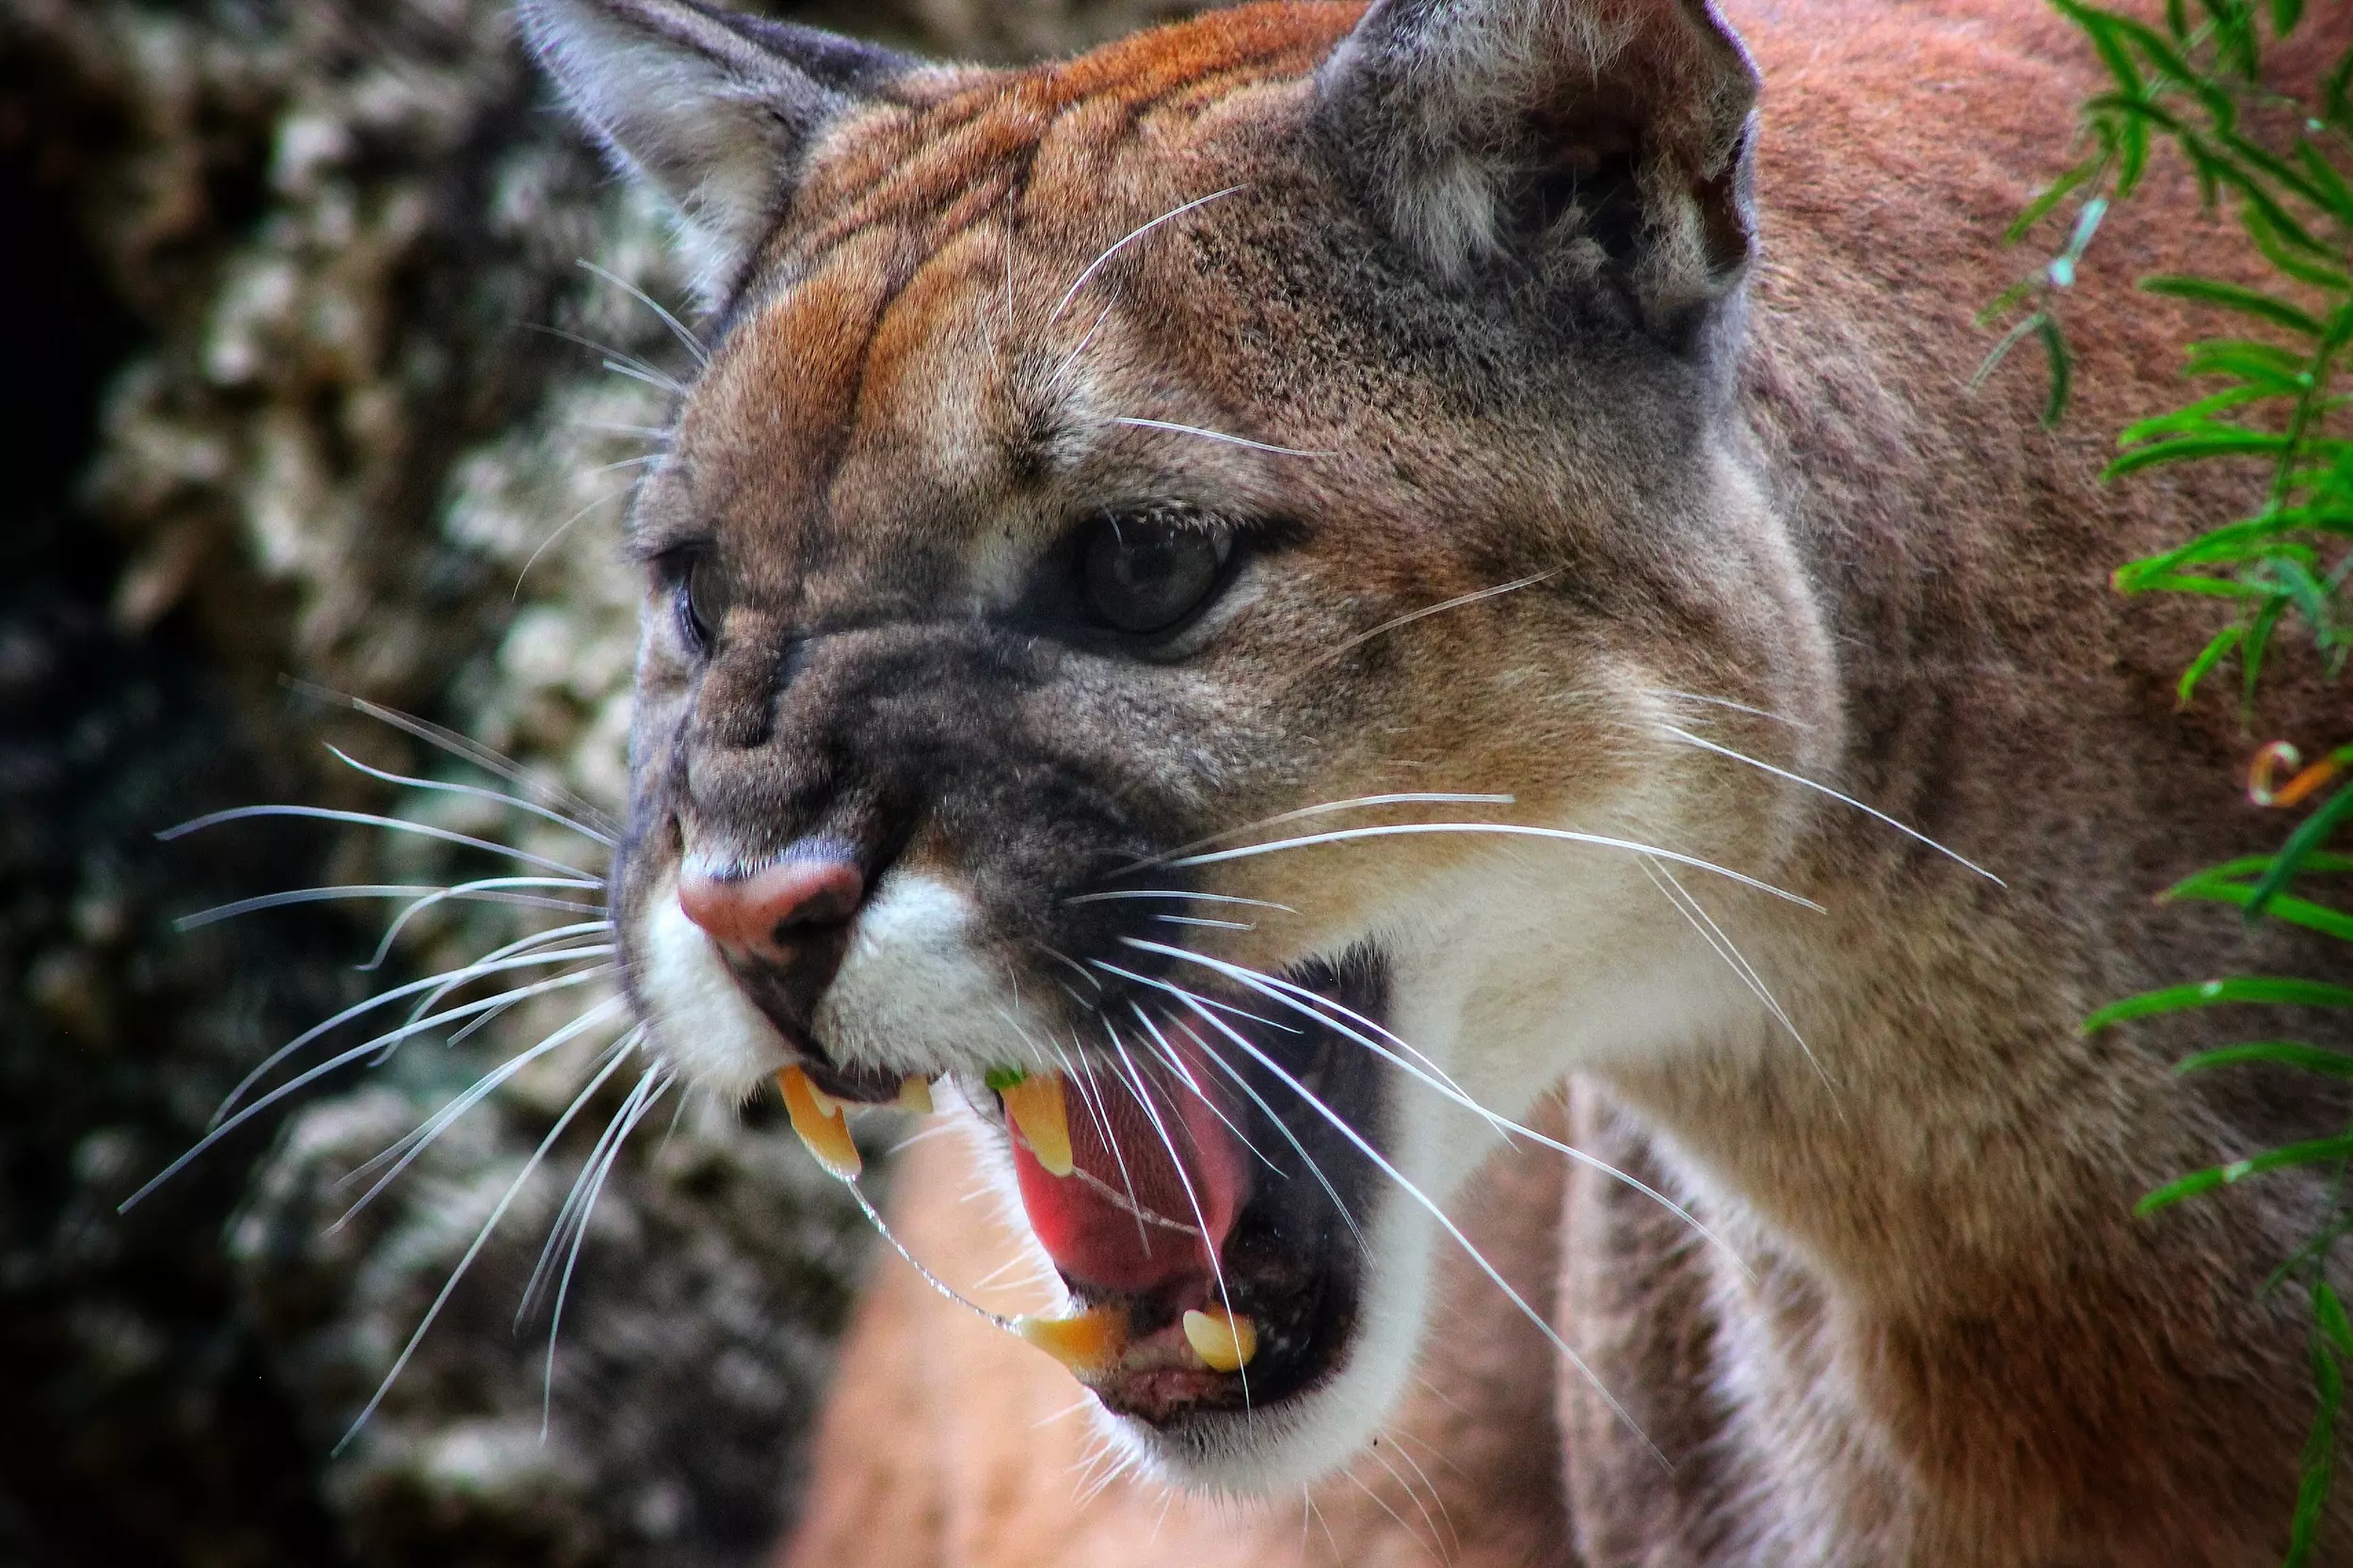 26 More People Come Forward With Mountain Lion Sightings in NJ